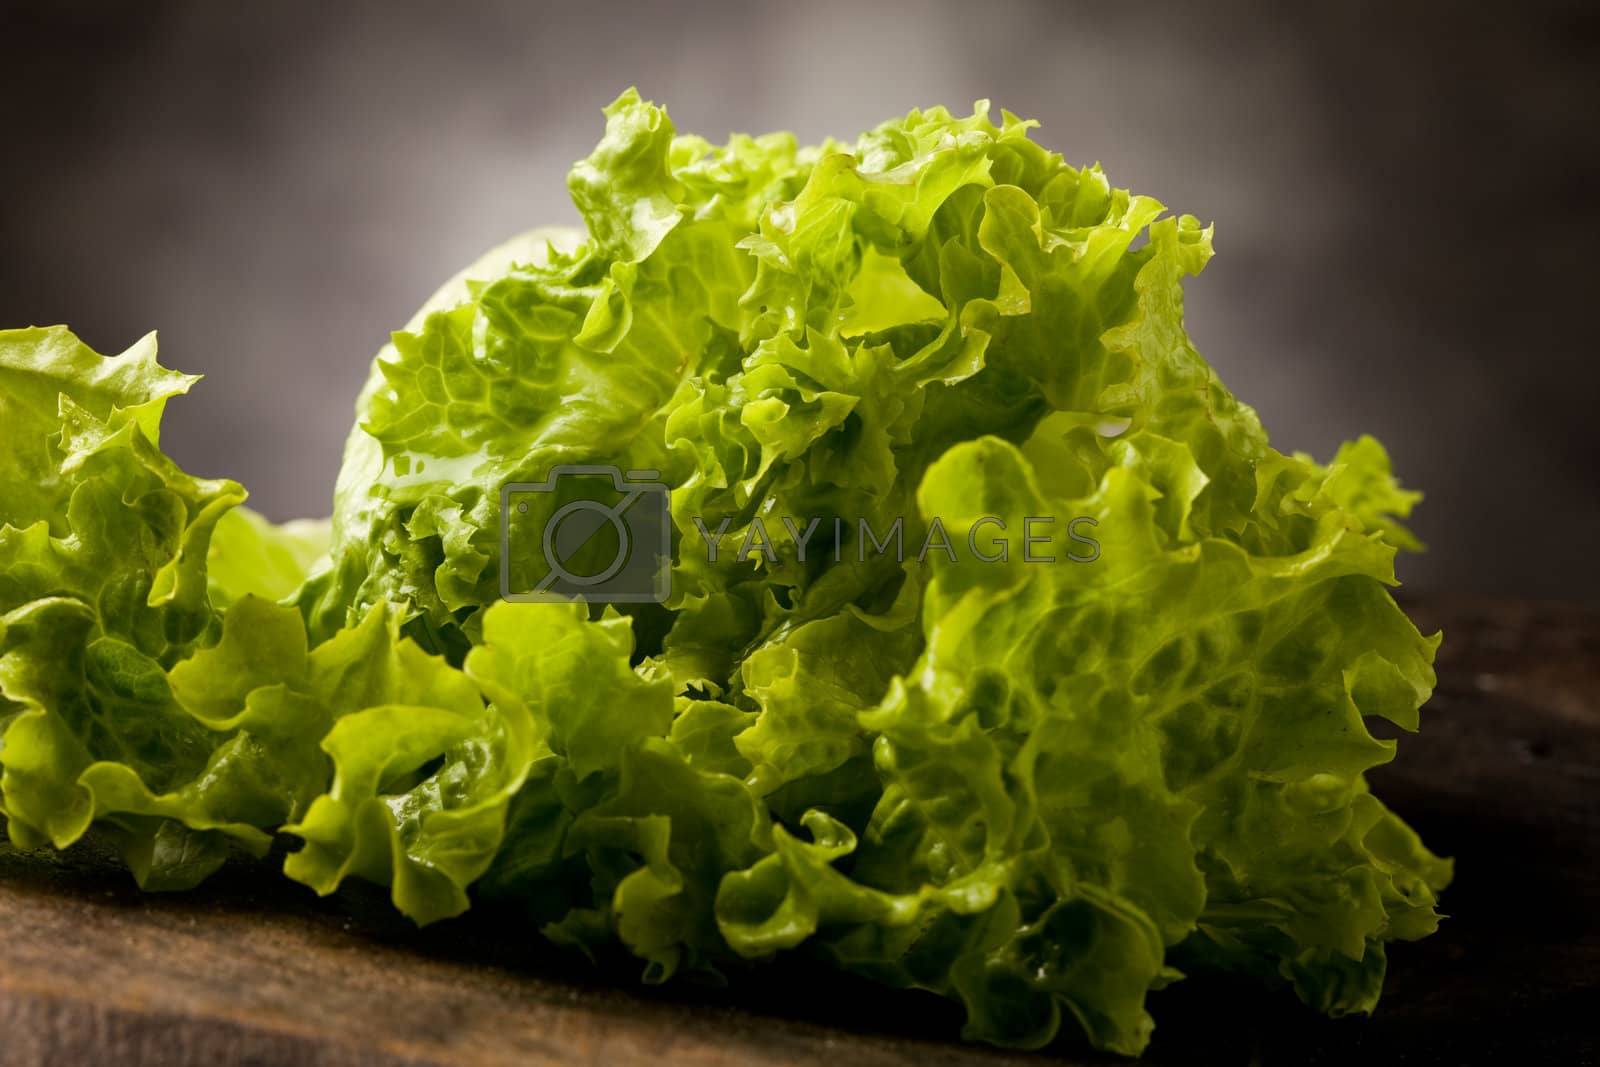 Royalty free image of Lettuce by genious2000de